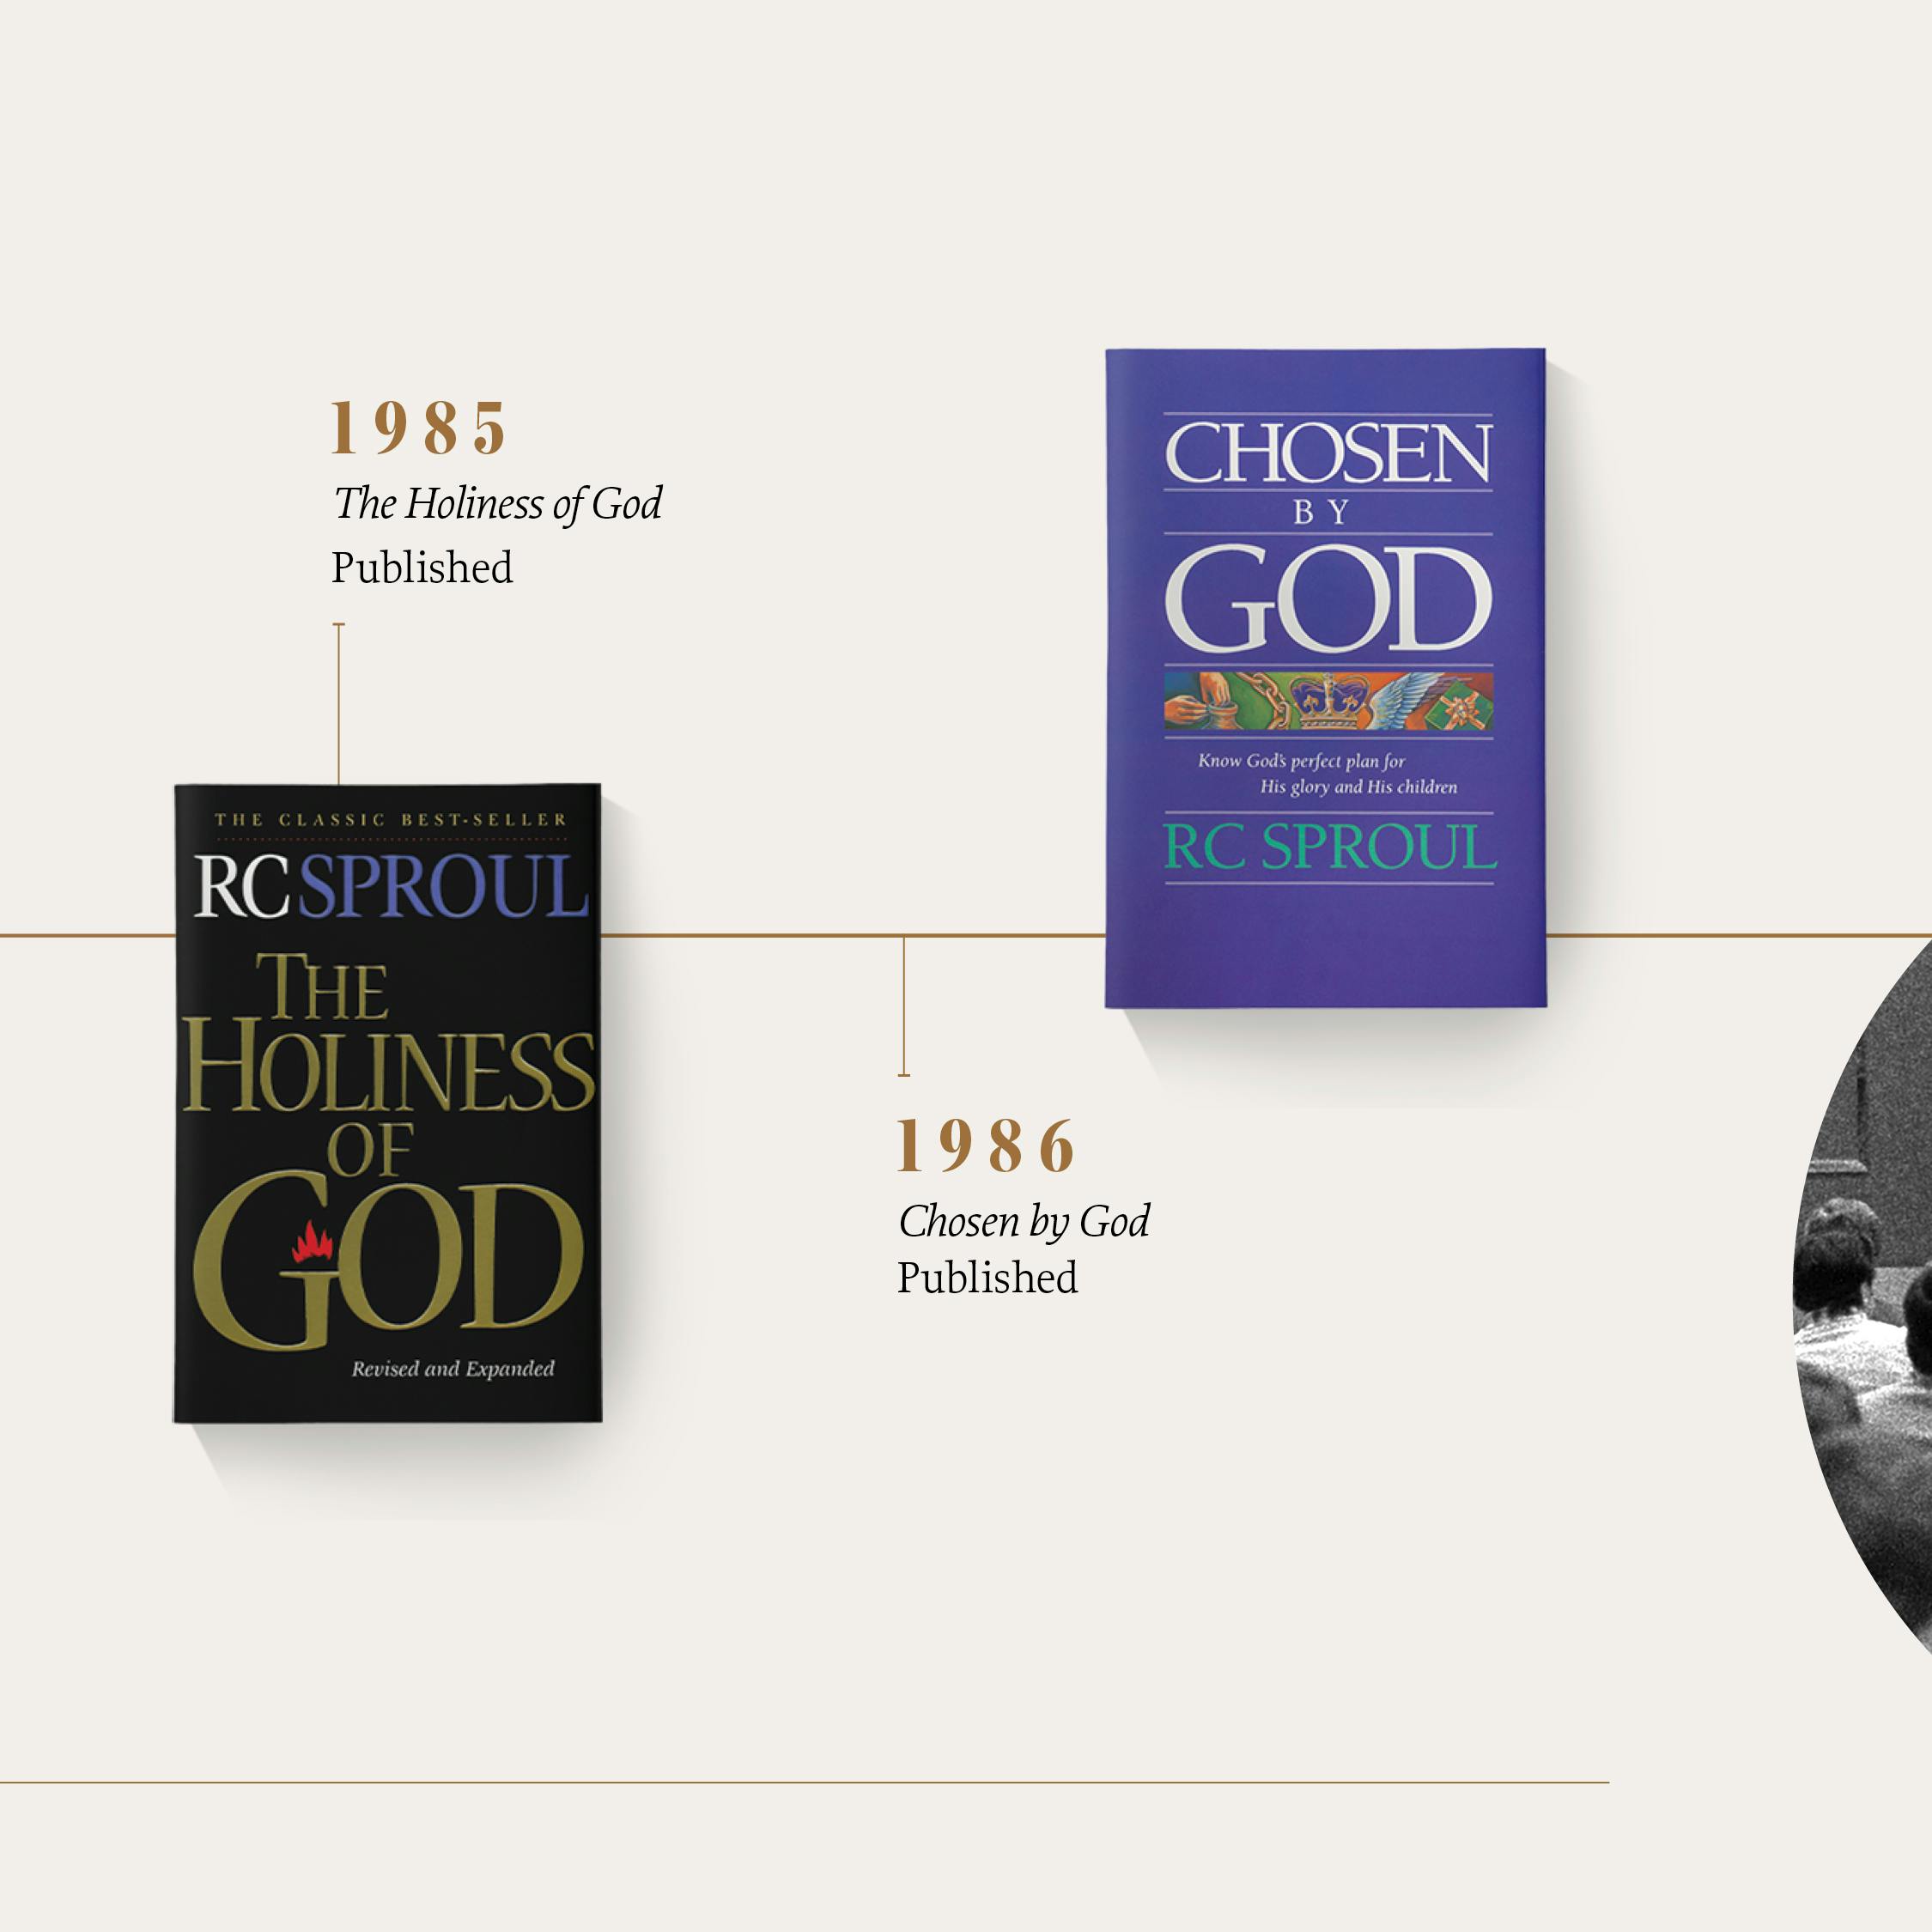 1985 :: The Holiness of God by R.C. Sproul book published :: 1986 :: Chosen by God by R.C. Sproul book published